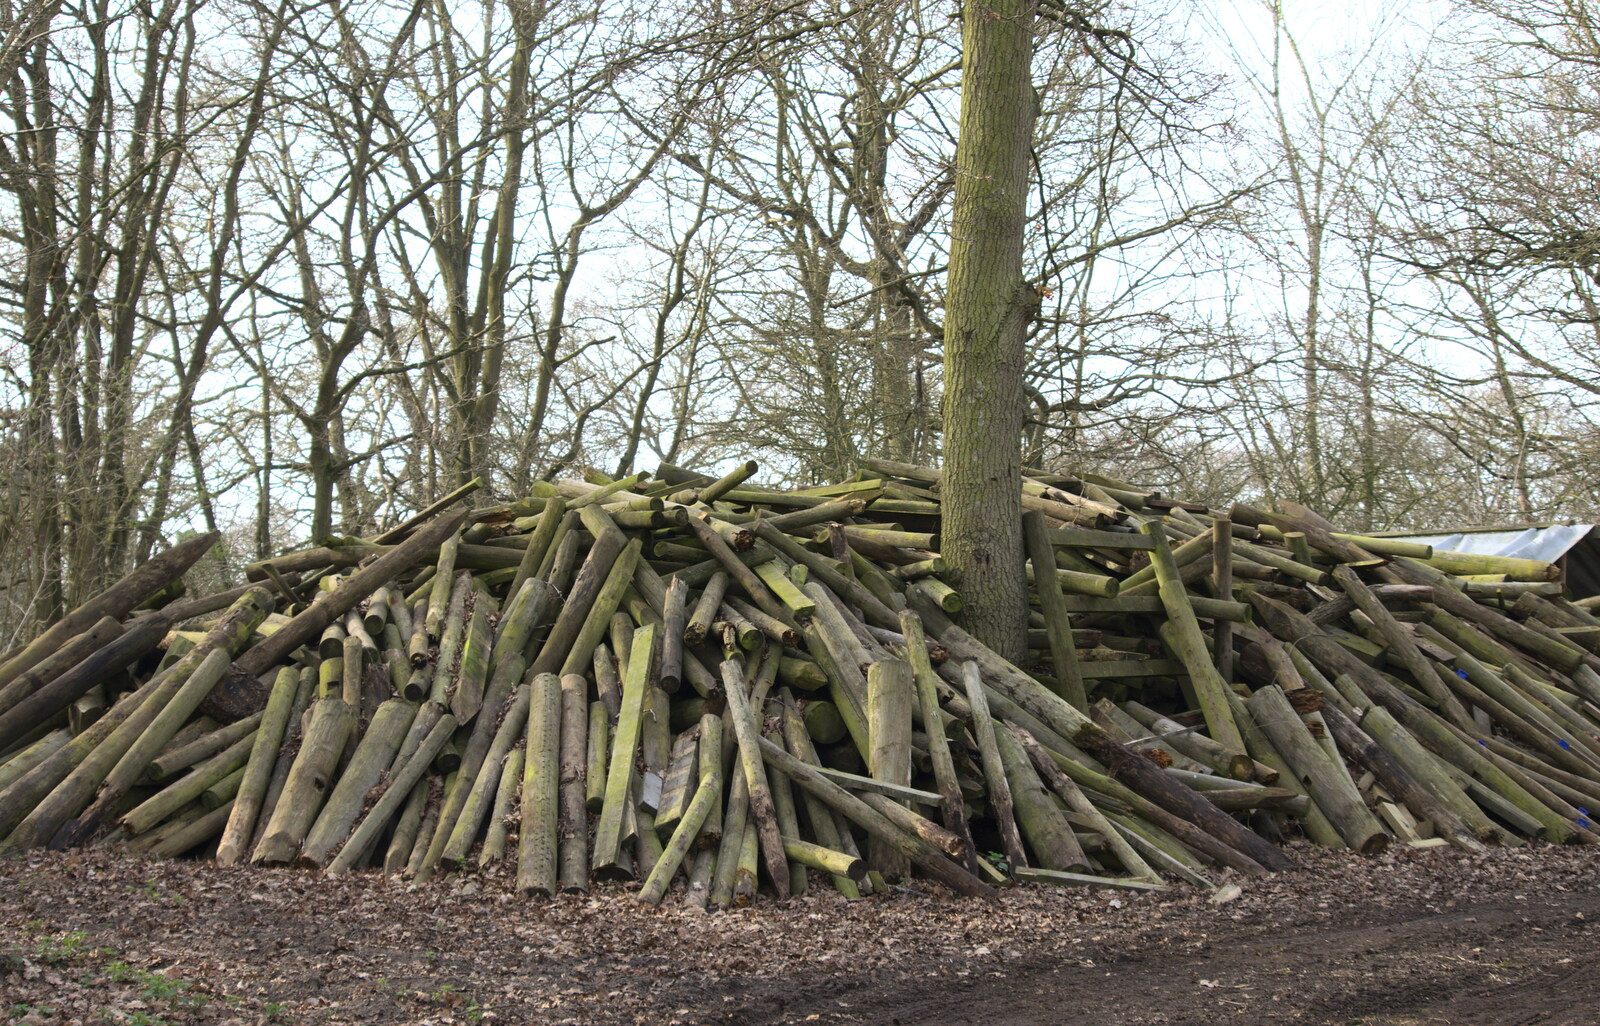 A stack of logs from Redgrave and Lopham Fen, Suffolk Border - 11th March 2017